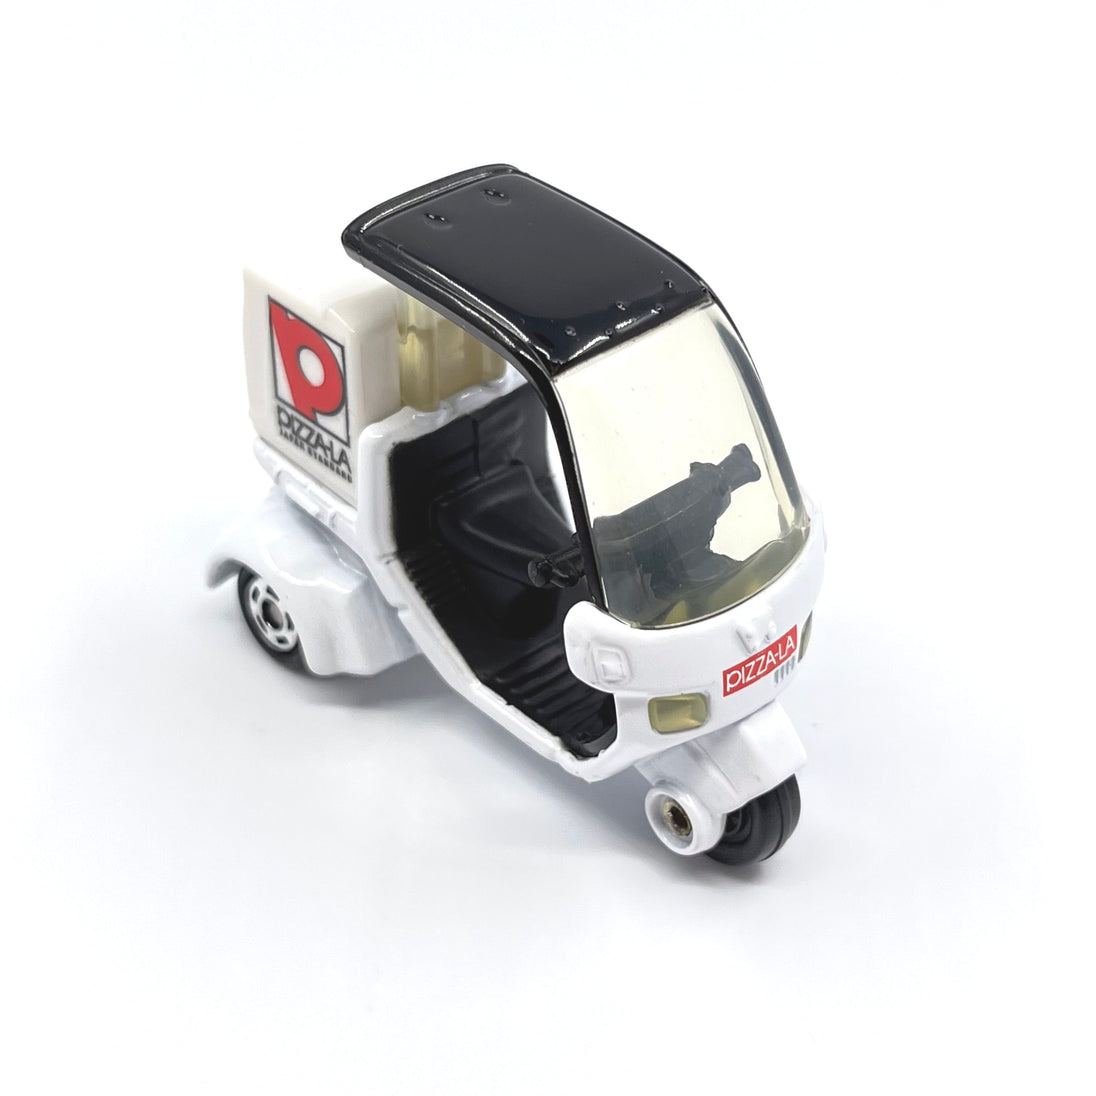 1:39 Pizza-La Delivery Bike Alloy Tomica Diecast Car Model by Takara Tomy